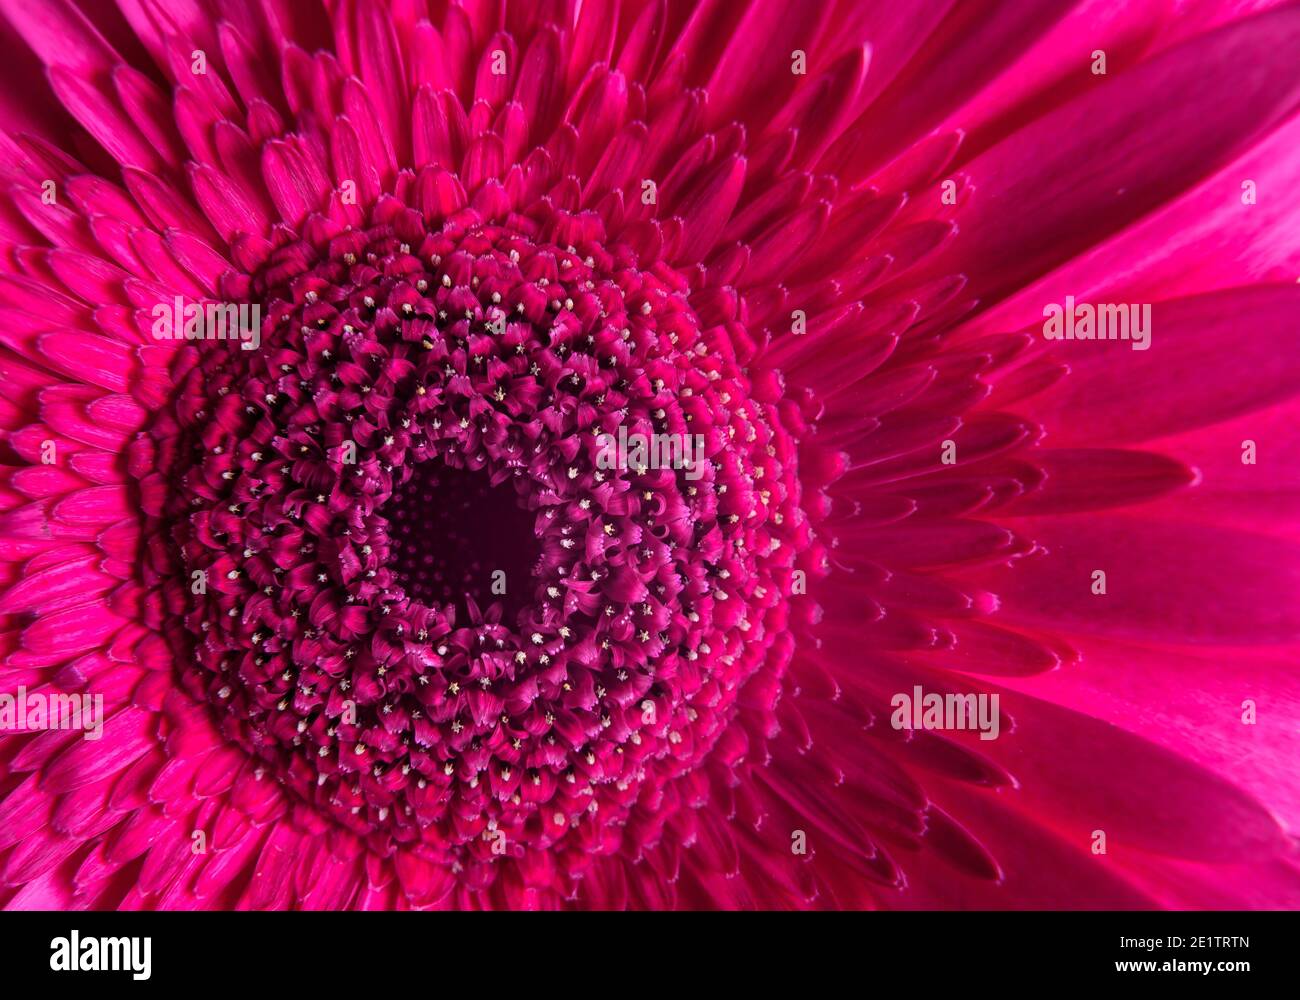 Macro photography of pink gerbera flower, fresh nature plant closeup. Floral texture pattern for background or wallpaper, detail of purple flower with Stock Photo